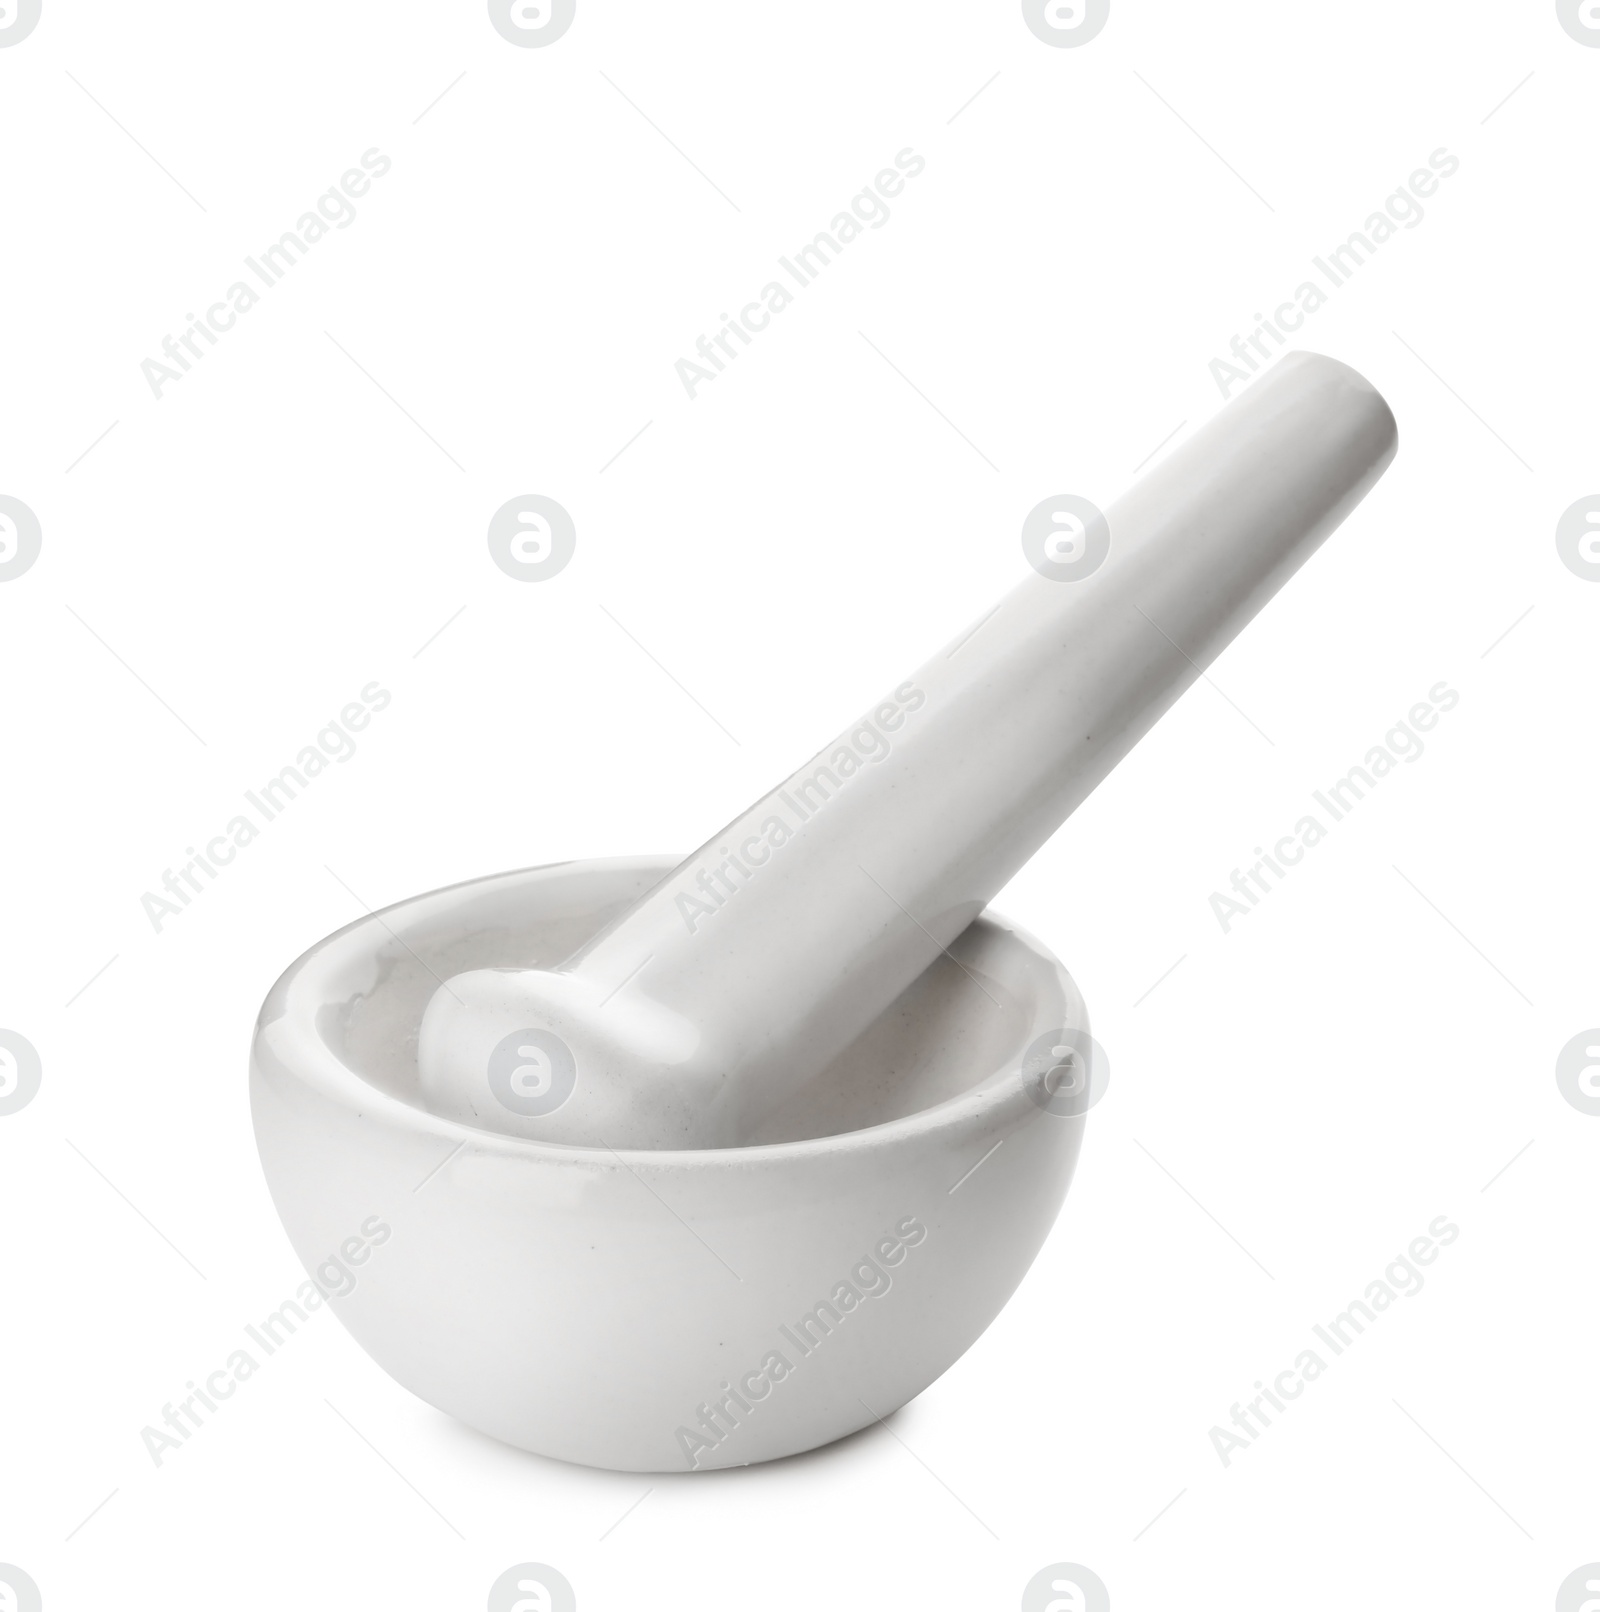 Photo of Mortar and pestle on white background. Medical objects